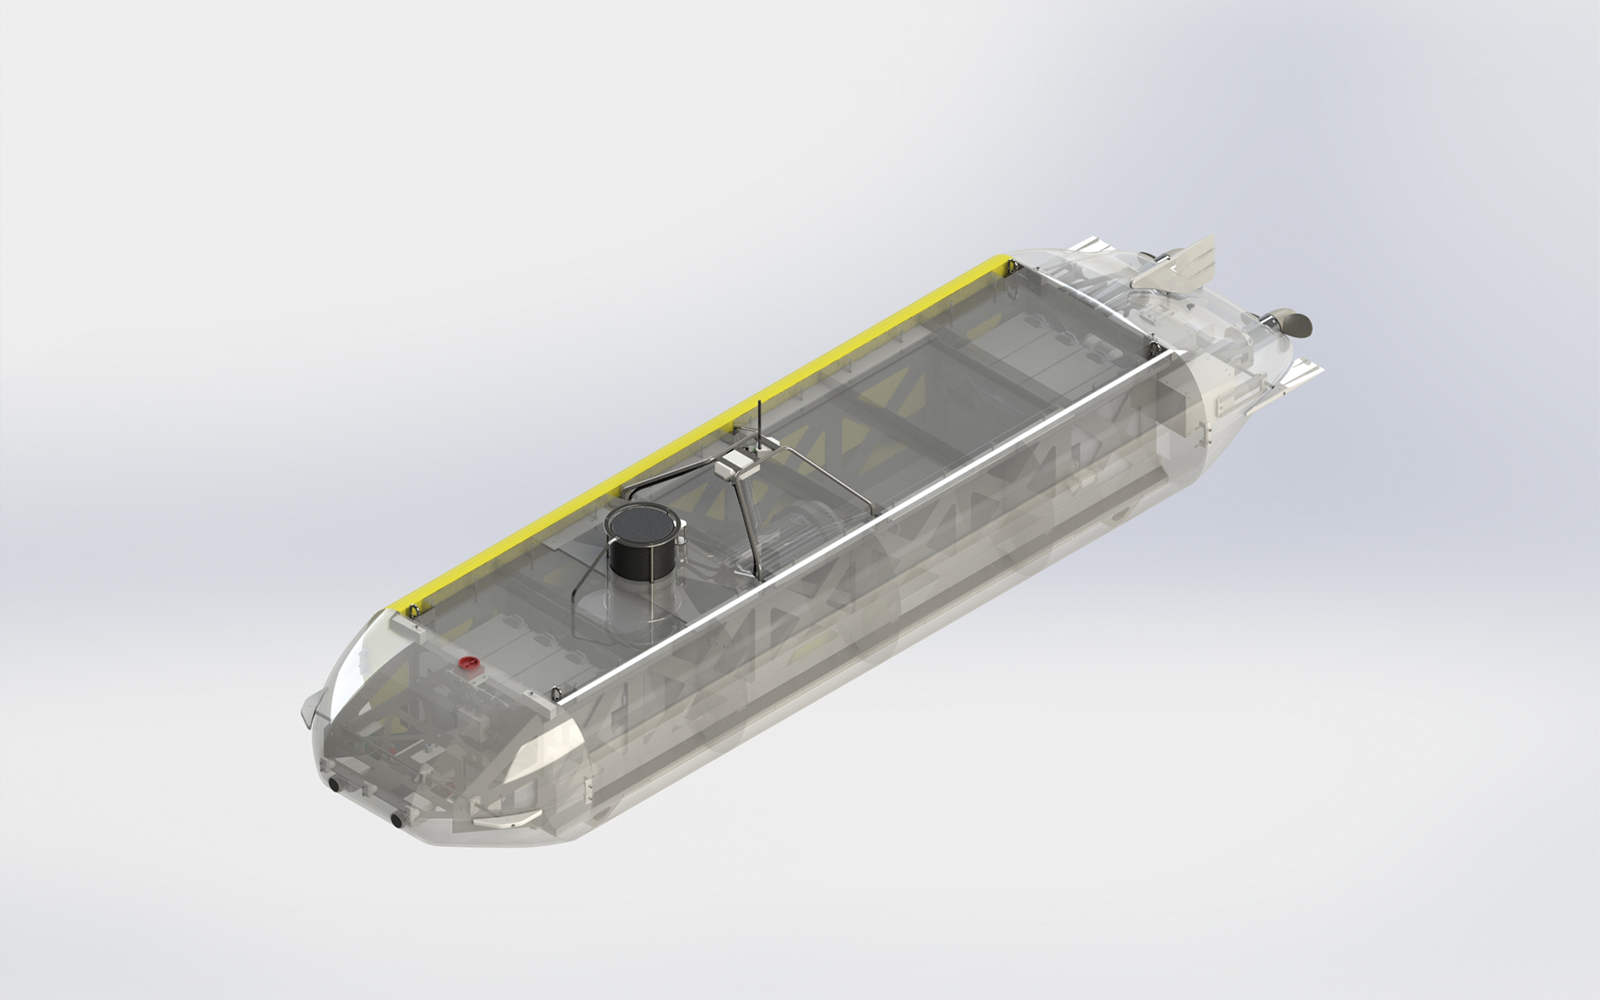 The autonomous underwater vehicle can reach depths of 6000 meters.